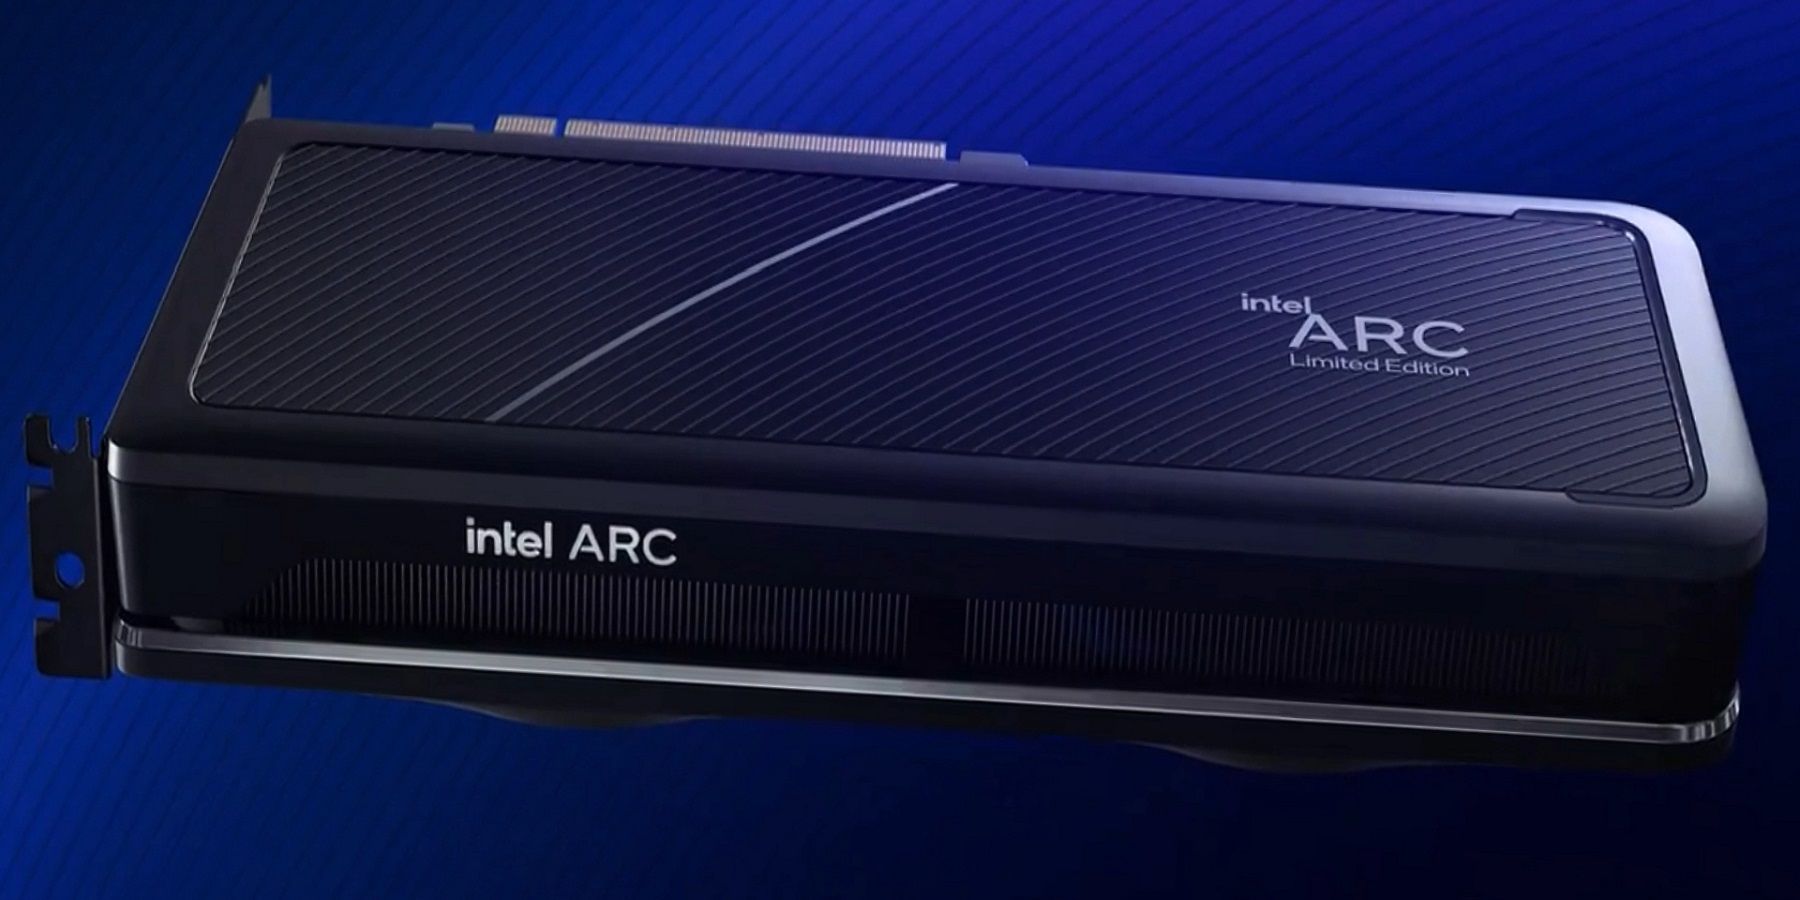 Image of an Intel Arc graphics card on a dark blue background.